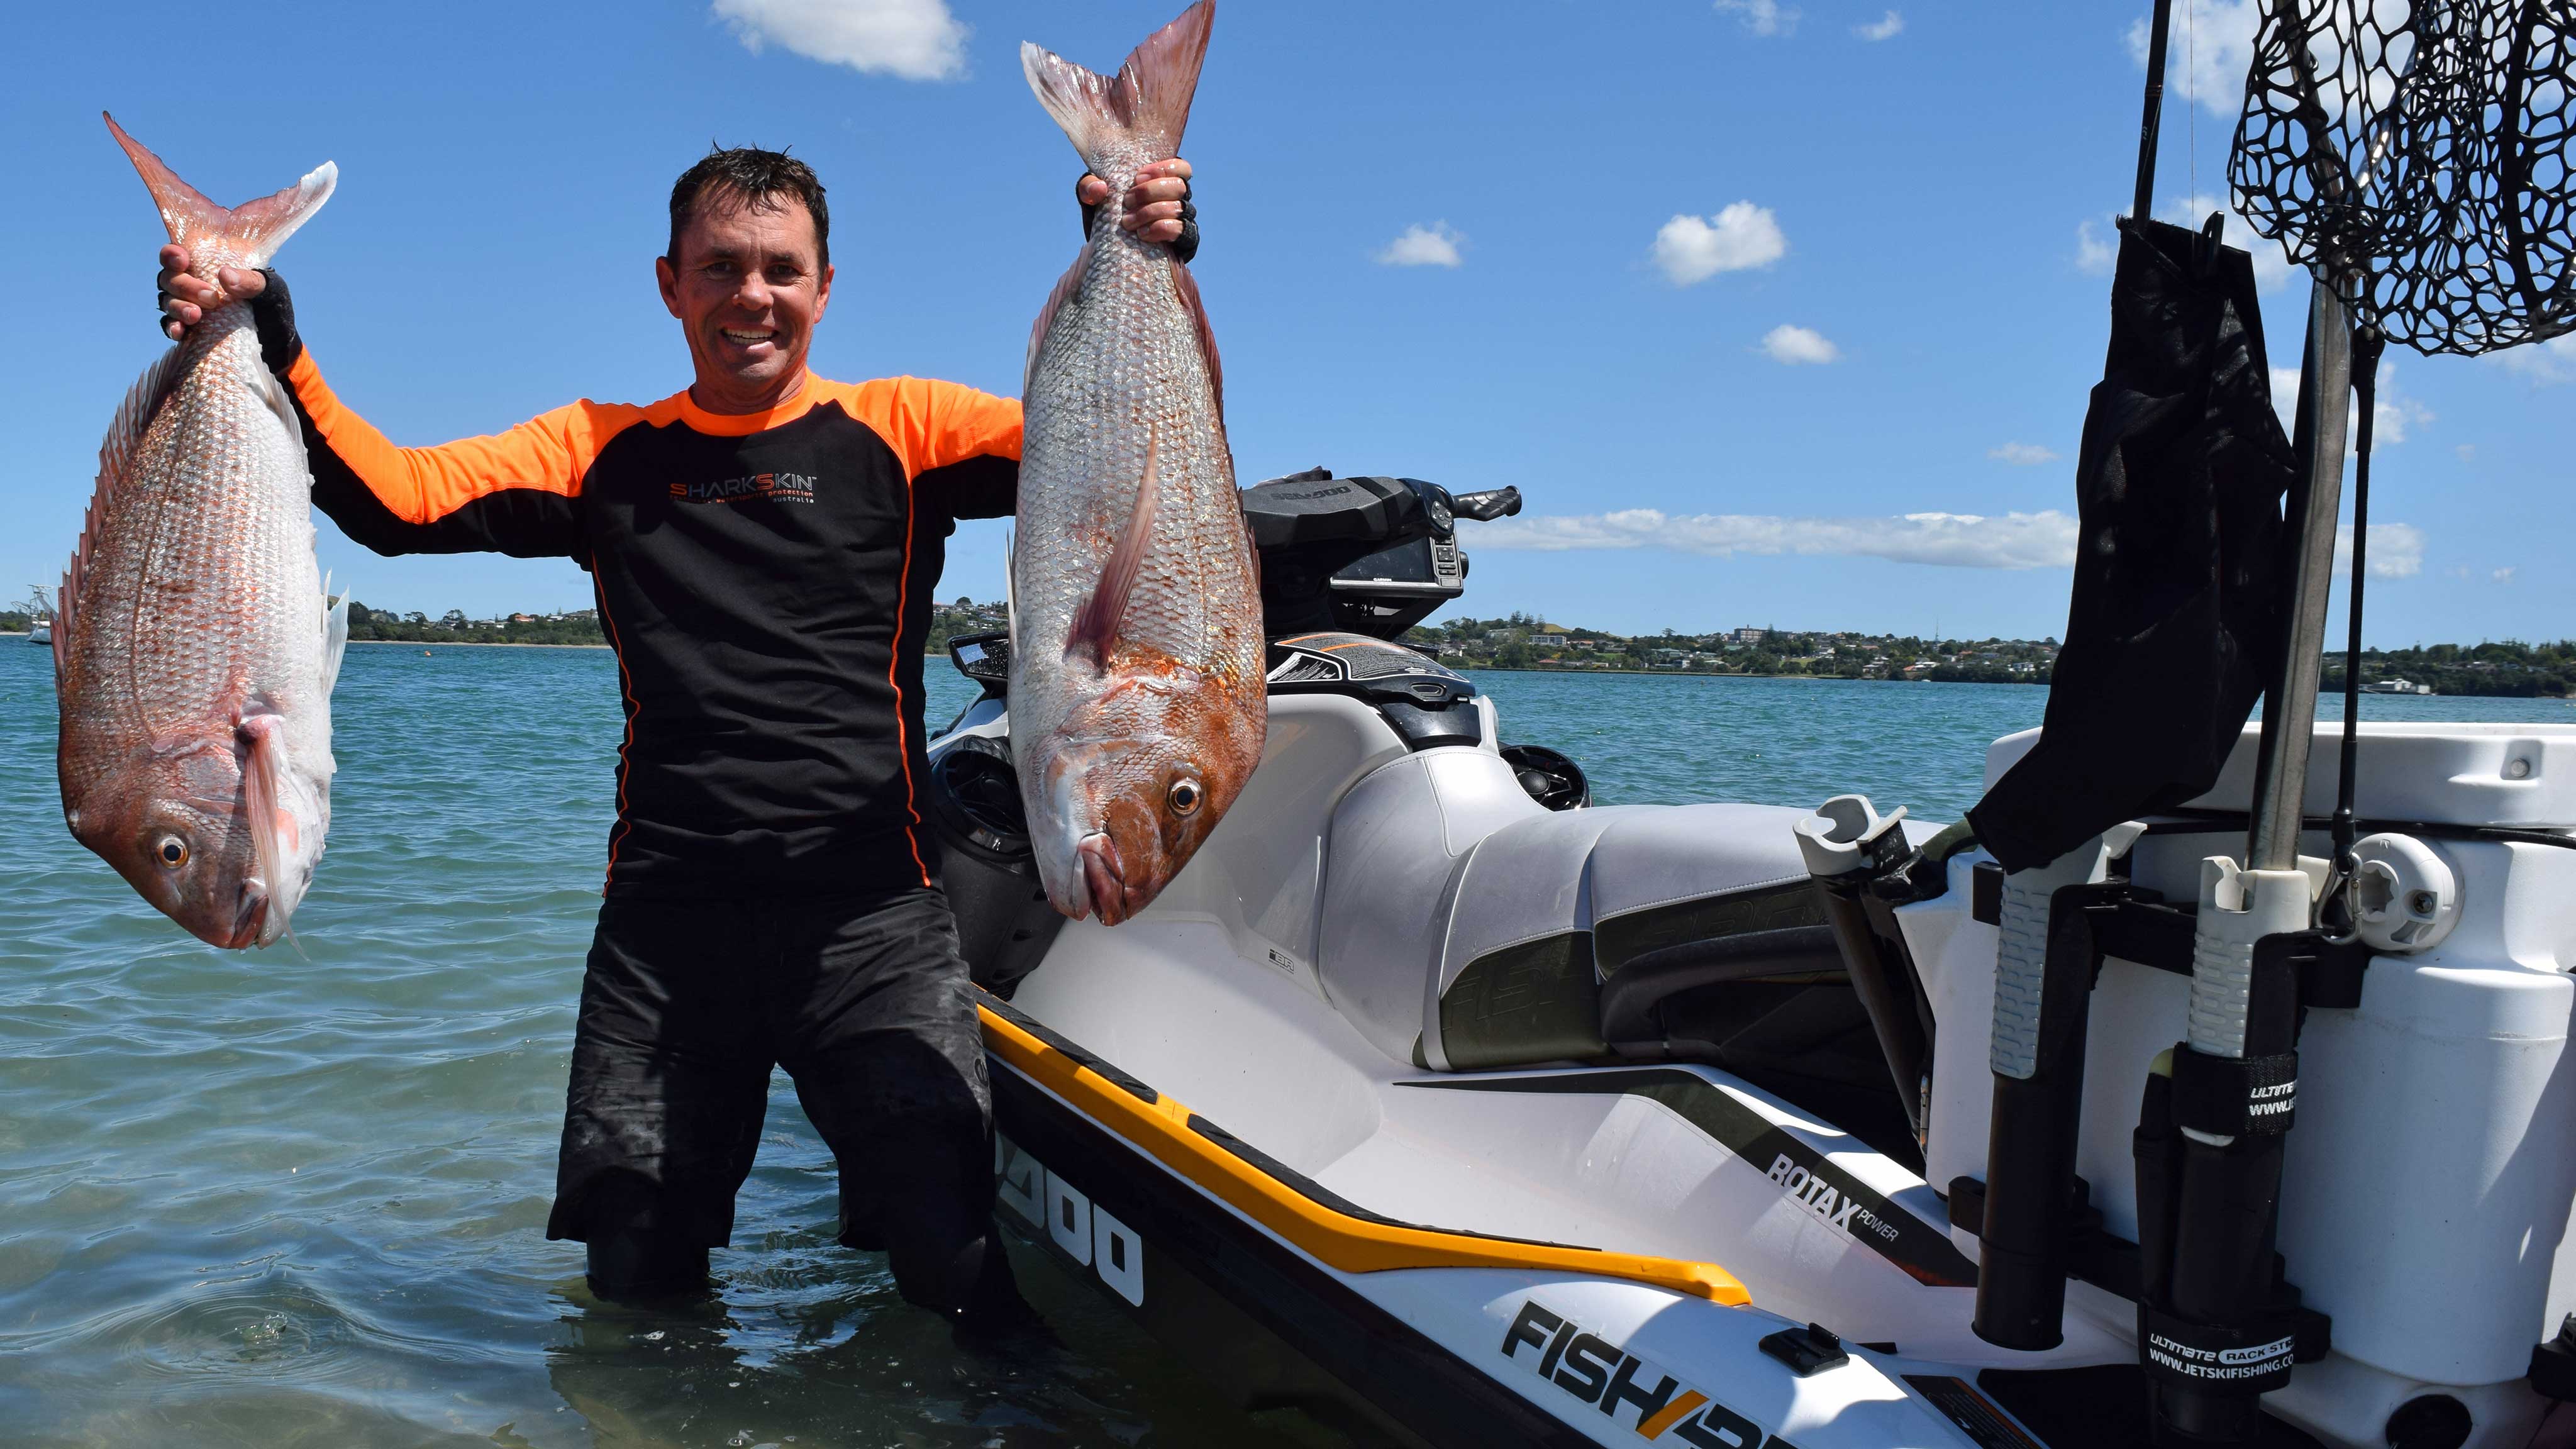 Andrew Hill holding two fishes next to his Sea-Doo FishPro